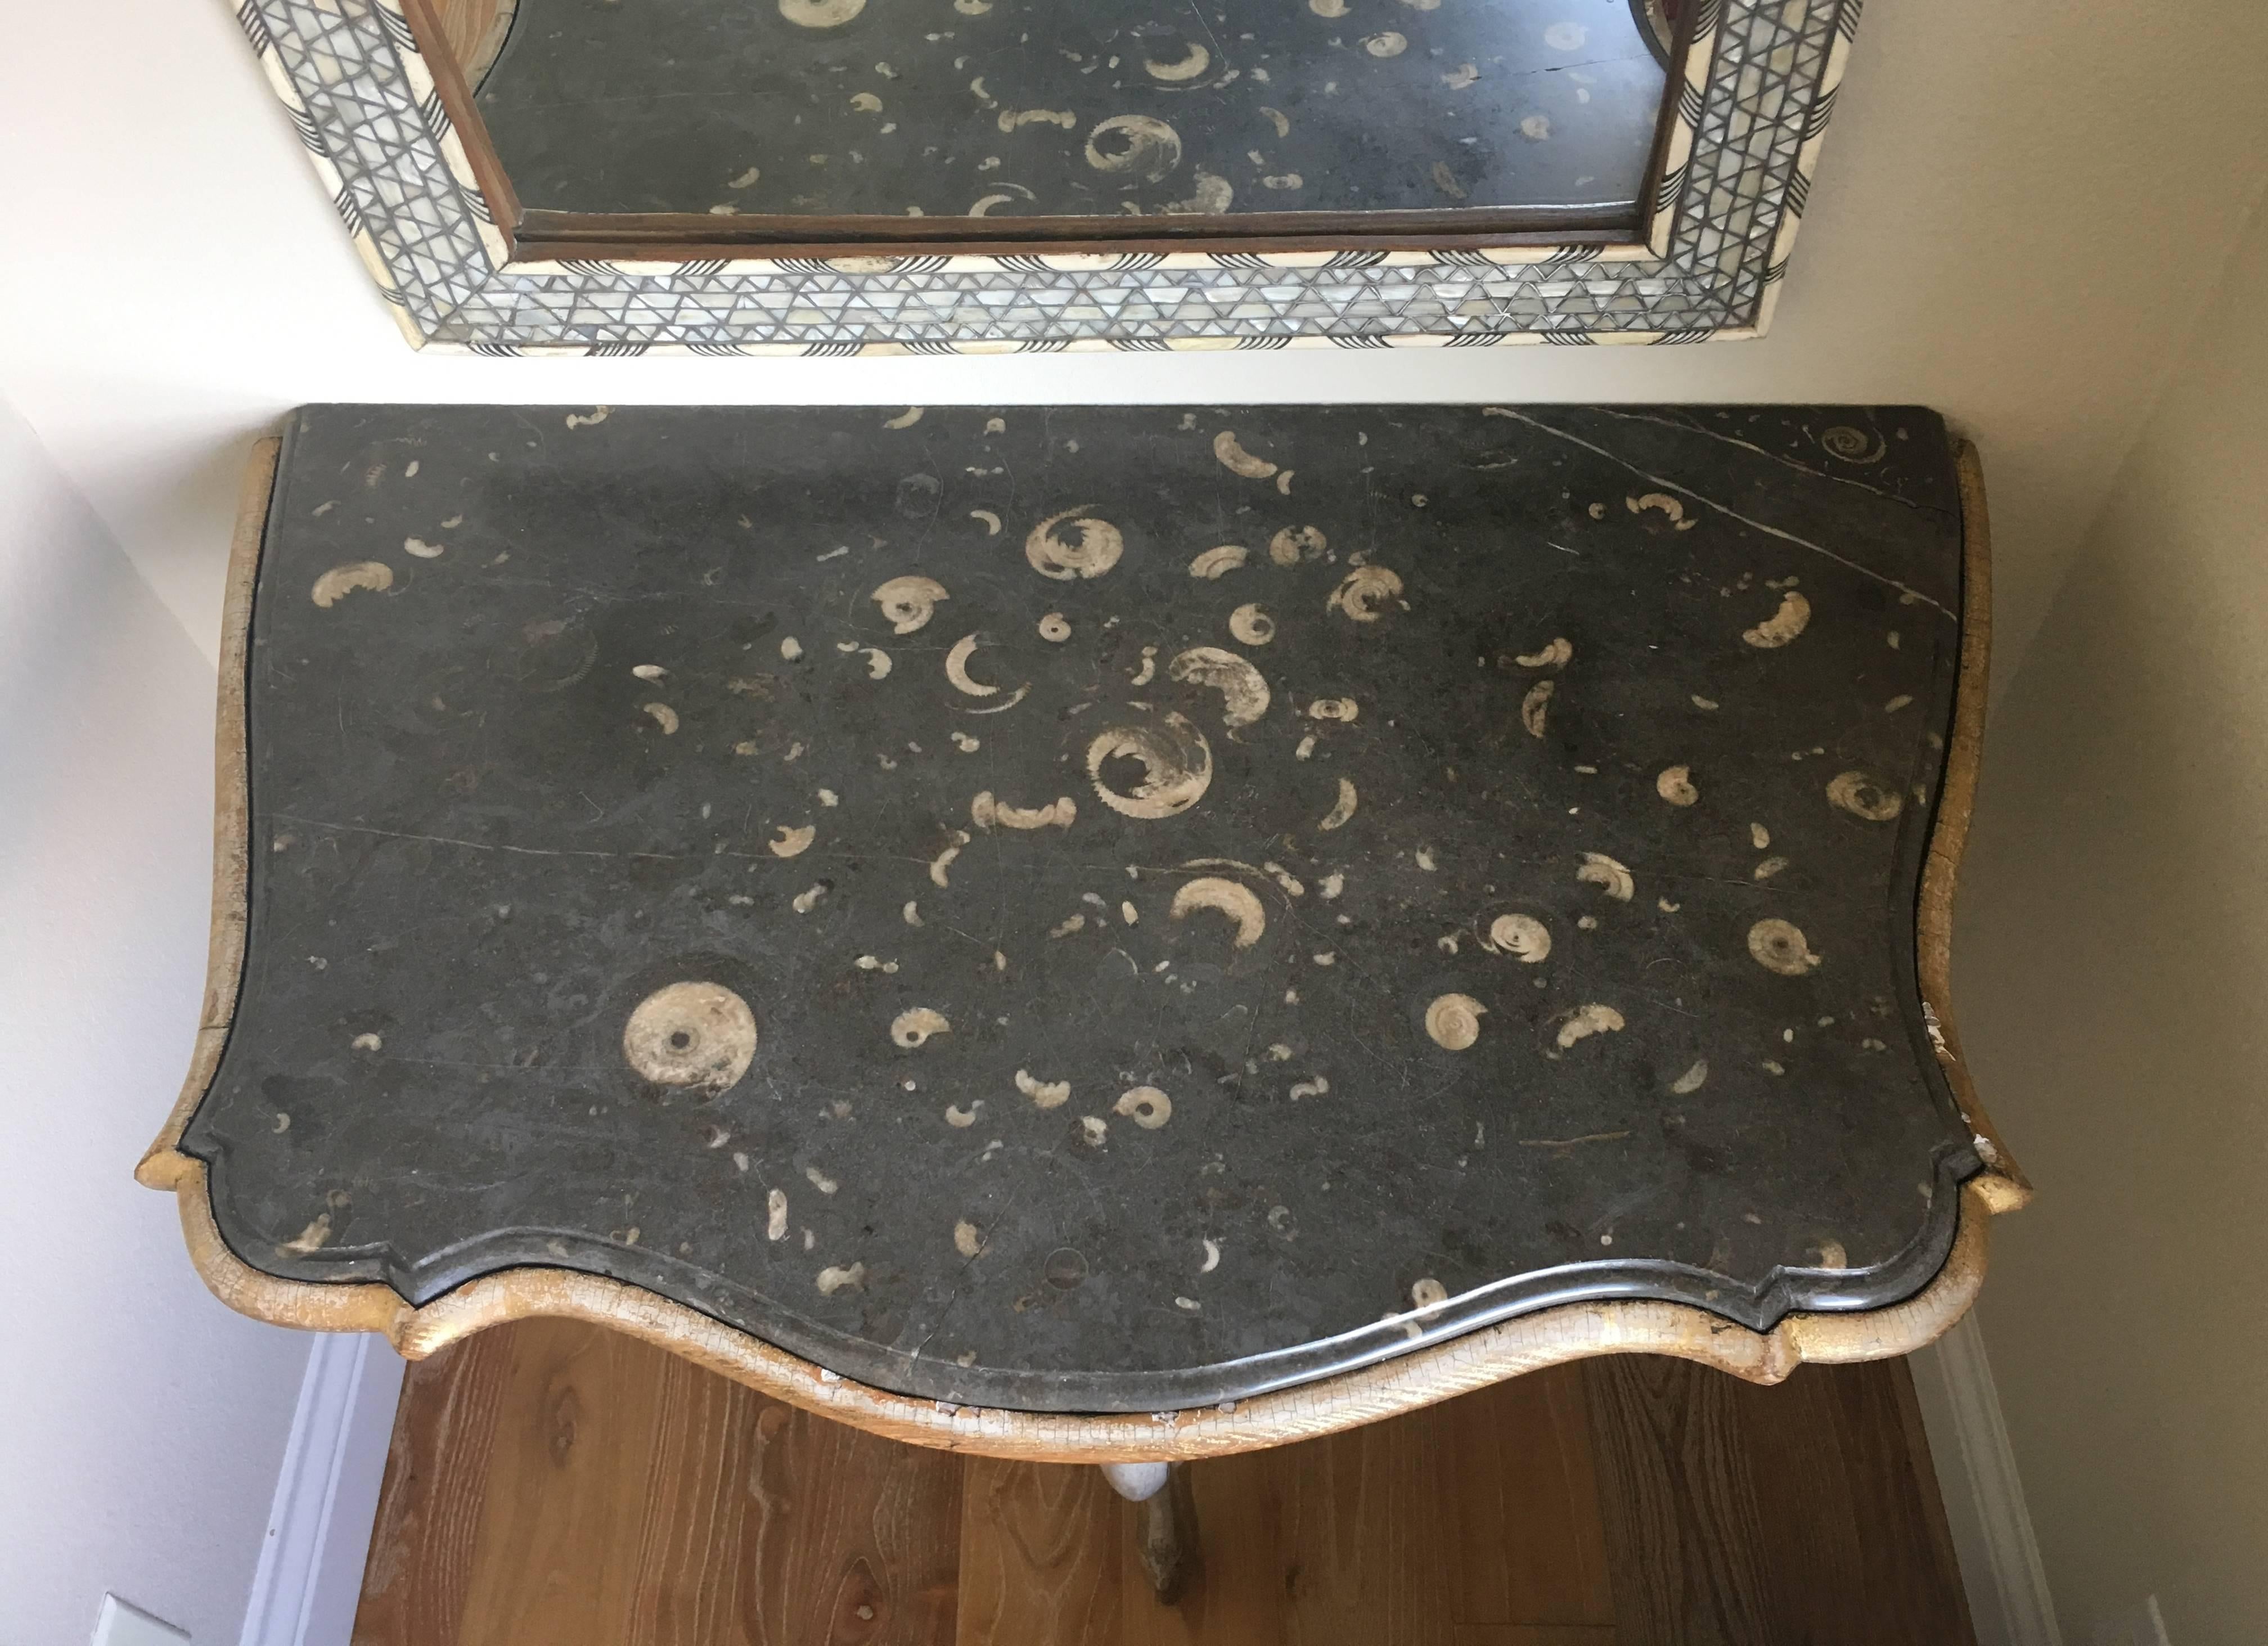 18th Century Venetian Rococo Wall-Mounted Console, hand-painted with gold leaf edged scalloped top, cabriole legs and rare fossilized marble top. Circa 1765. 